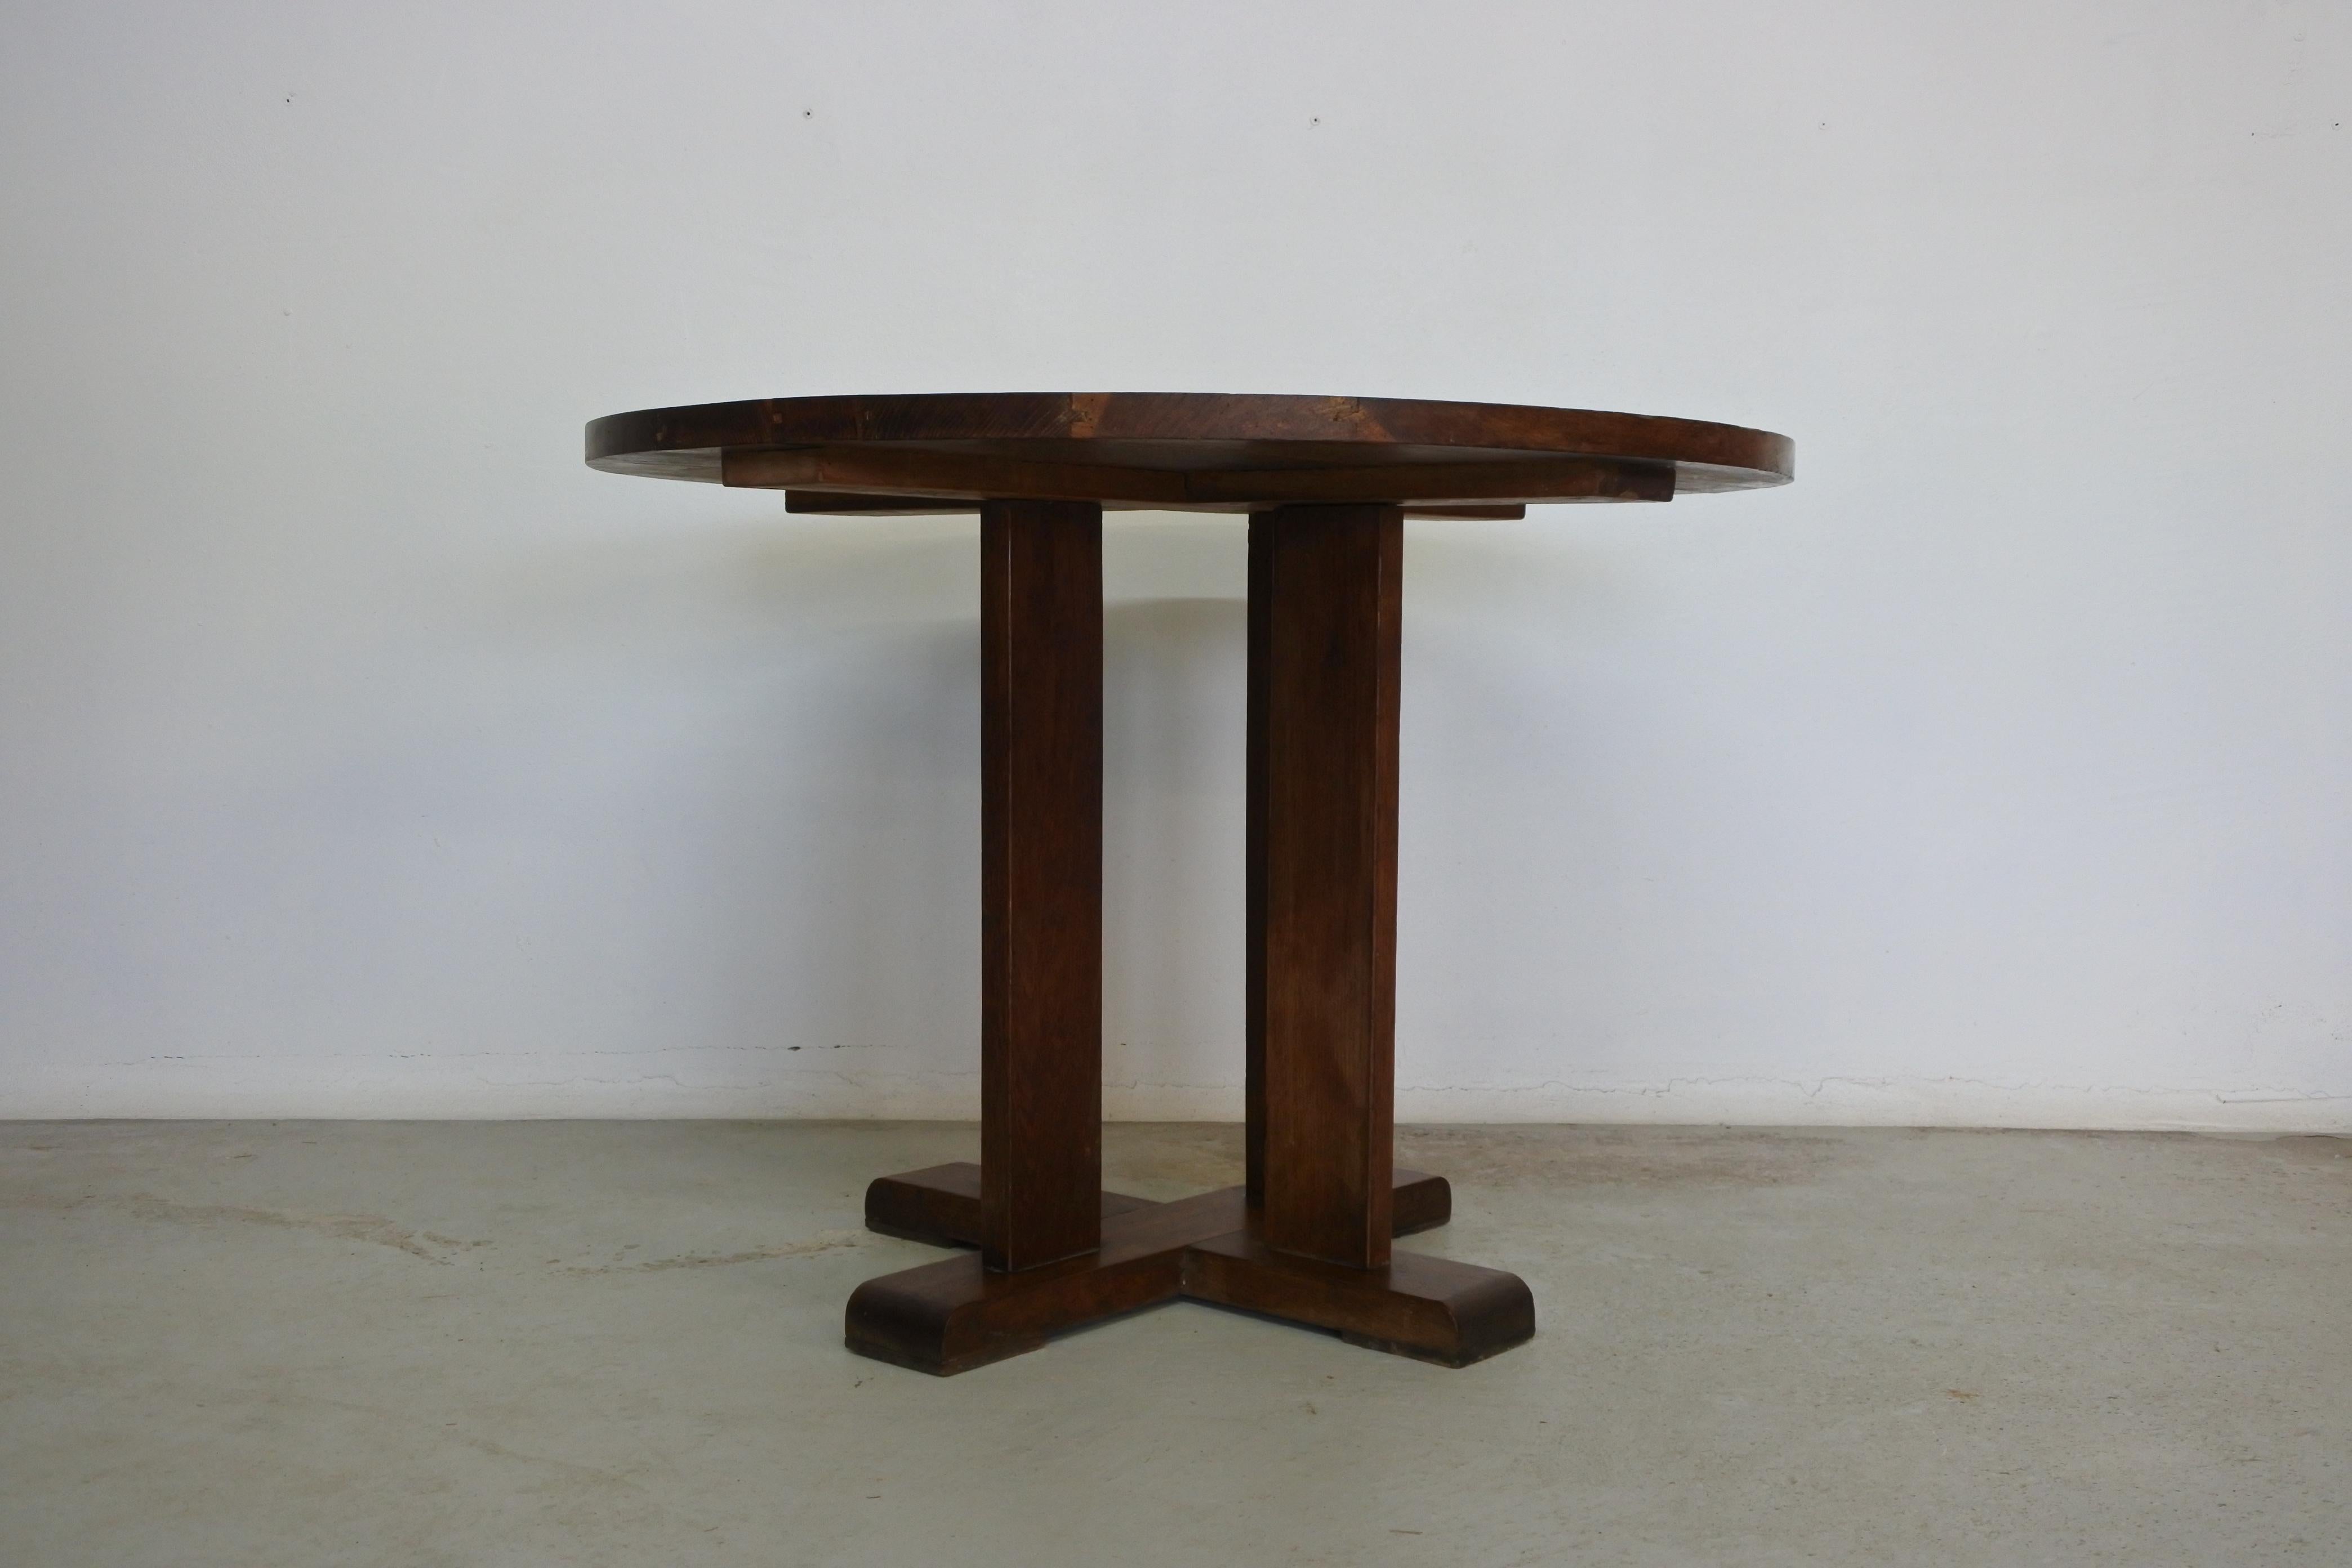 Art Deco guéridon table.
Made in France in the 1930s.
Solid oak wood. Beautiful grain.

Great to display a collection of glass or ceramic objects / vases
      